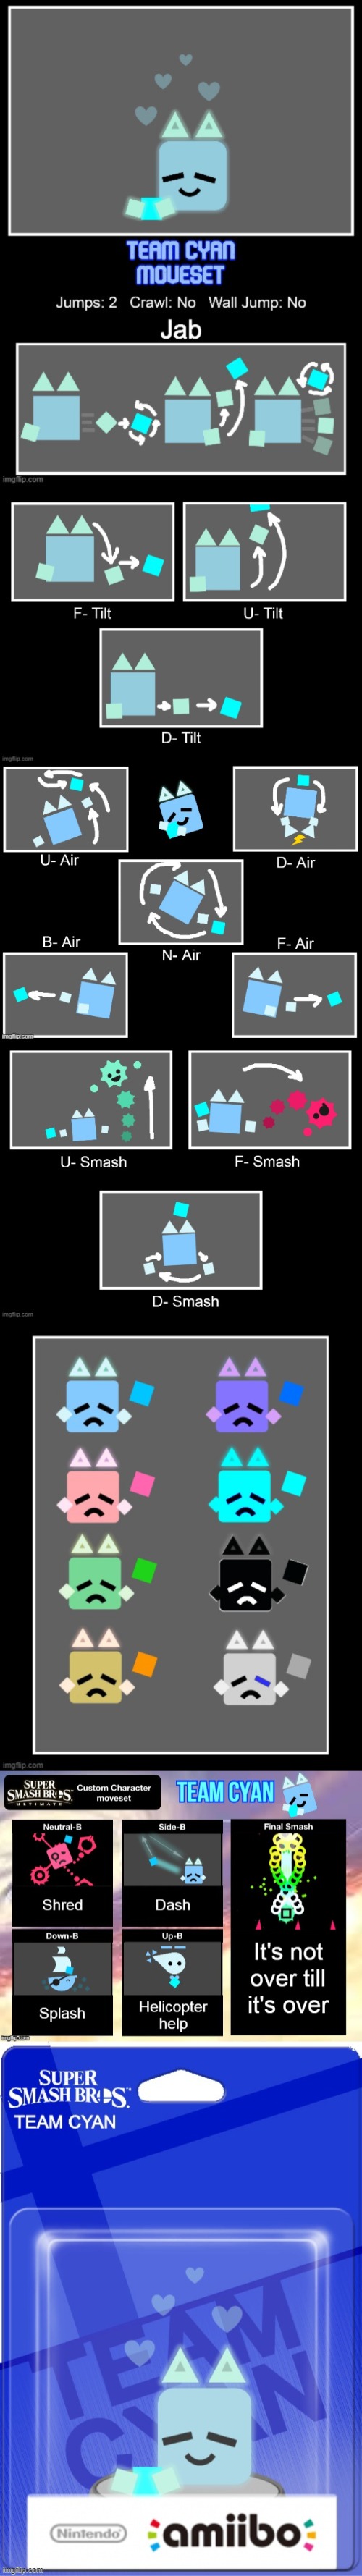 Team Cyan Moveset. Featuring incredible range! (Inspired by Dream's post) | made w/ Imgflip meme maker